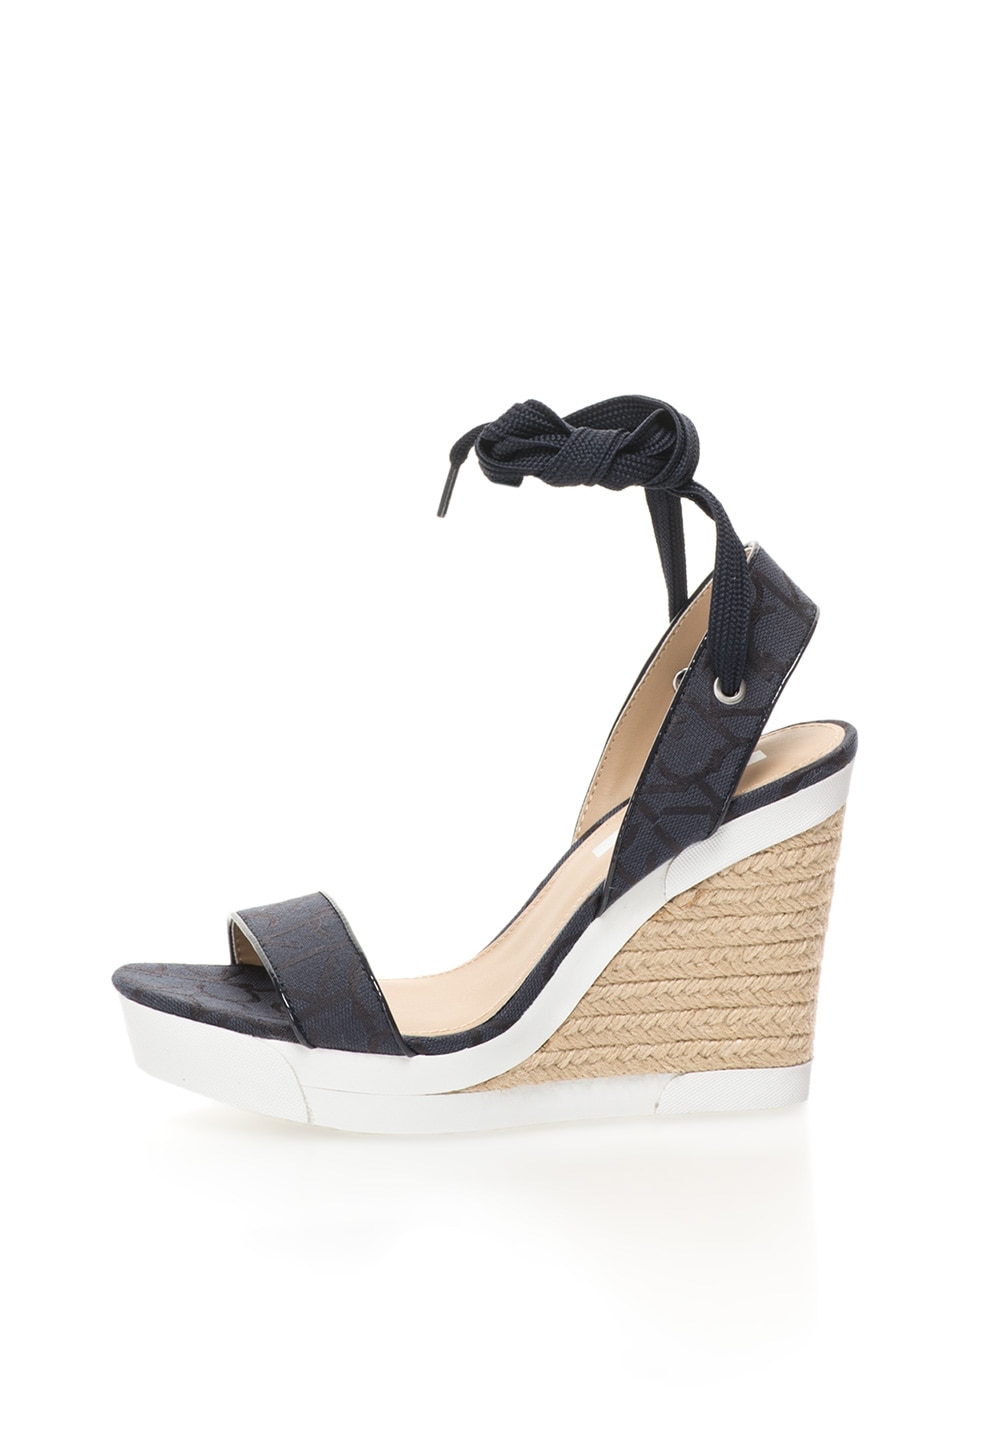 Megalopolis lose yourself Frank Calvin Klein Jeans Sandale wedge bleumarin inchis Eleanor 36 - eMAG.ro